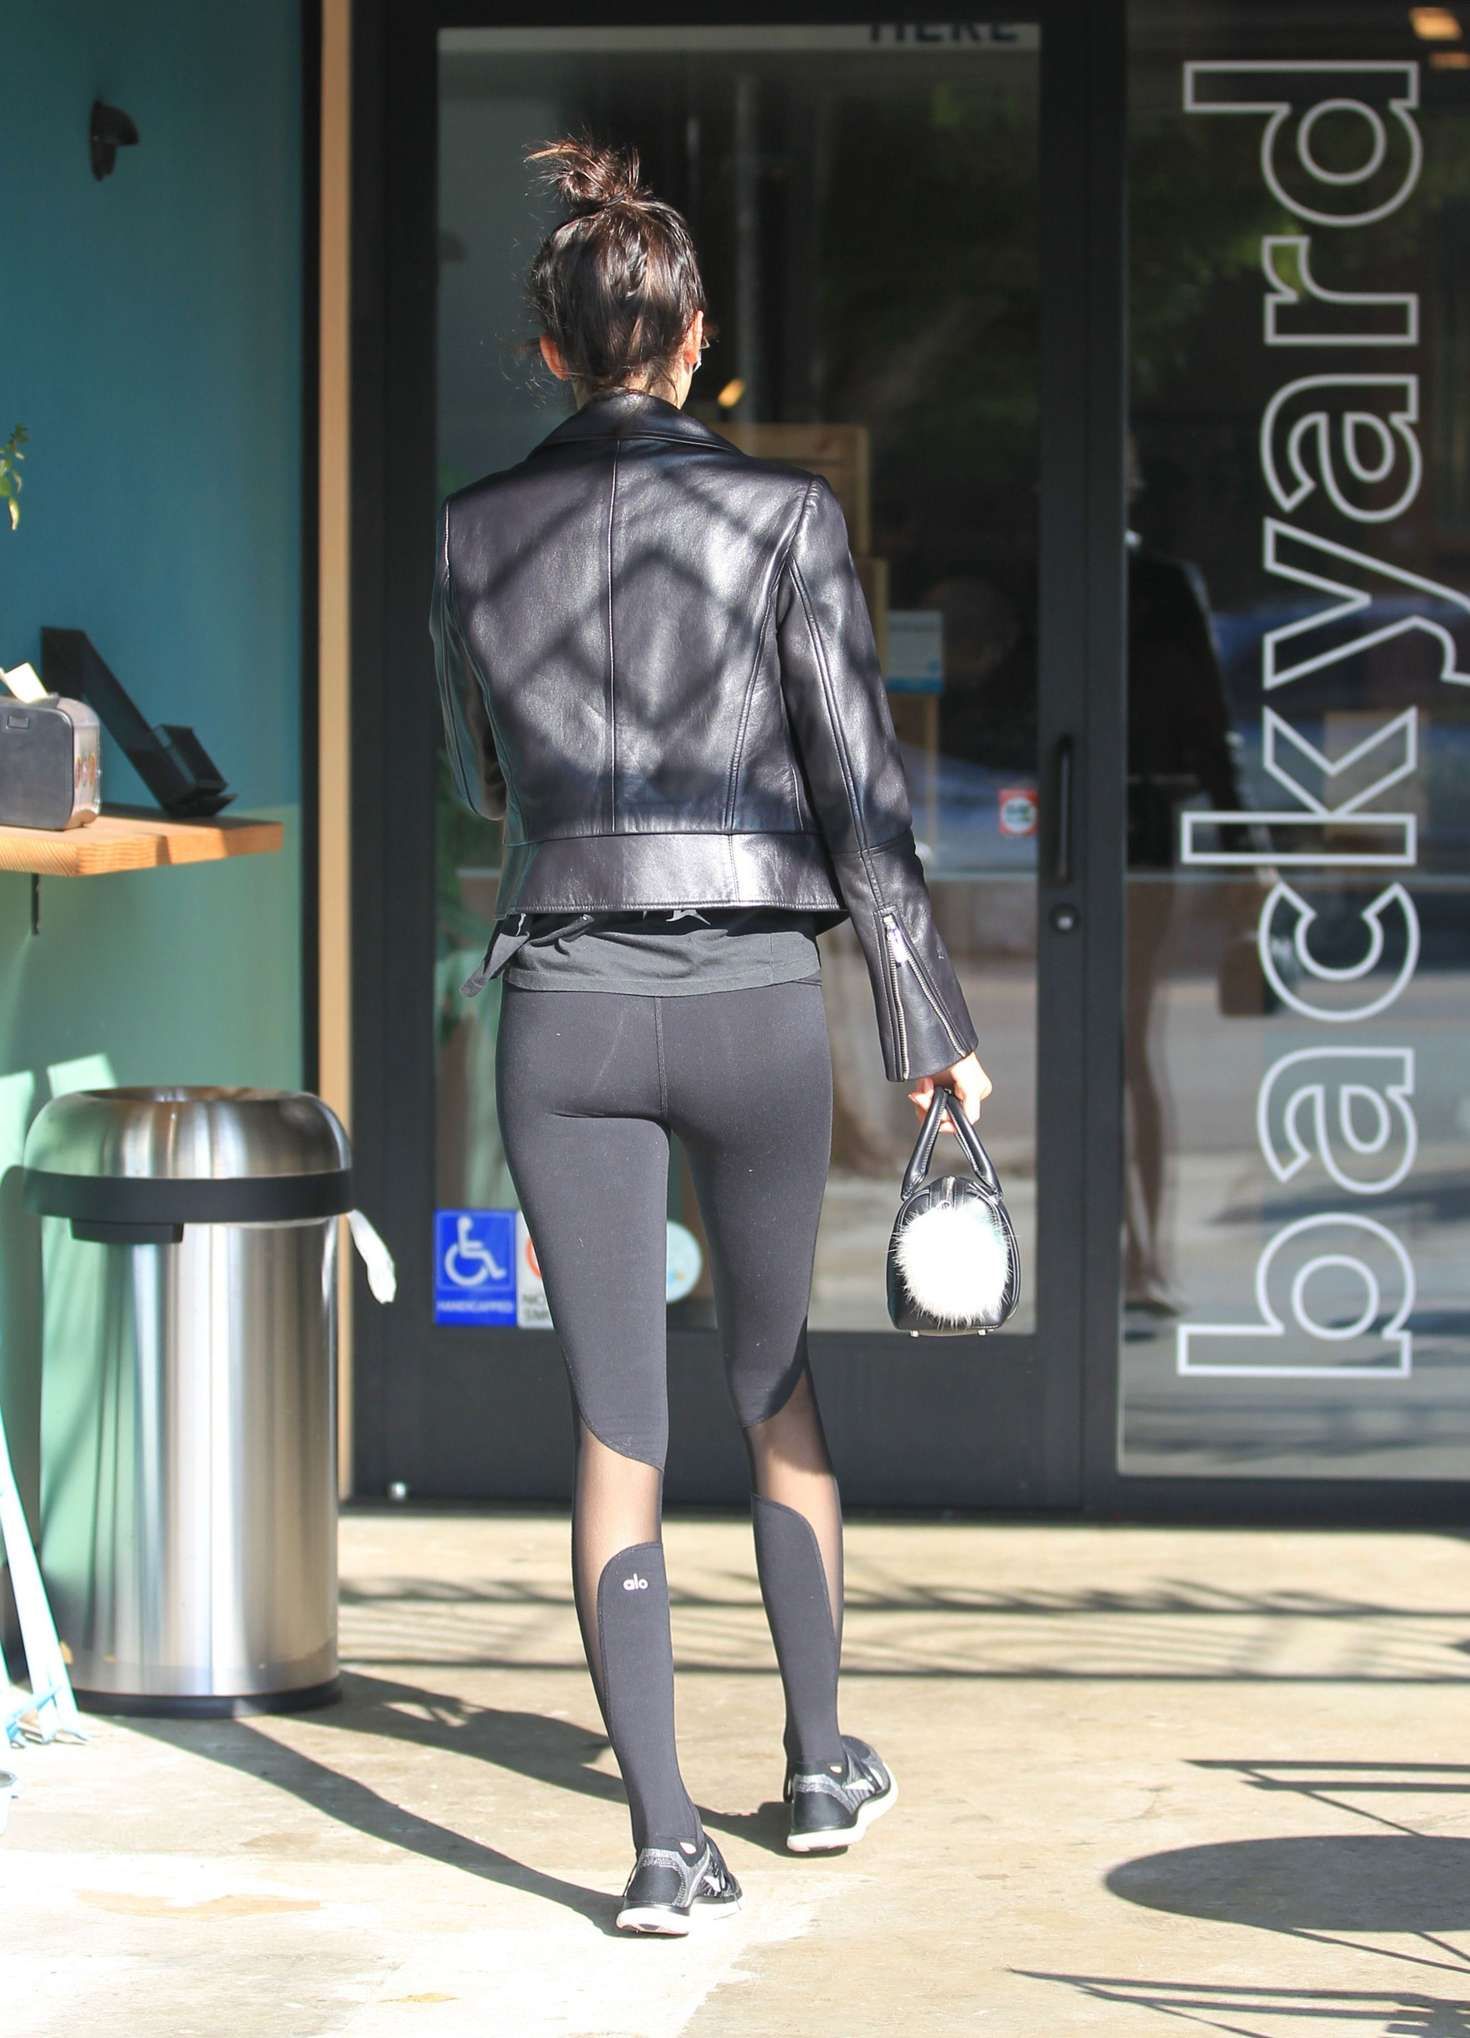 Kendall-Jenner-Booty-in-Tights-Shopping-9.jpg